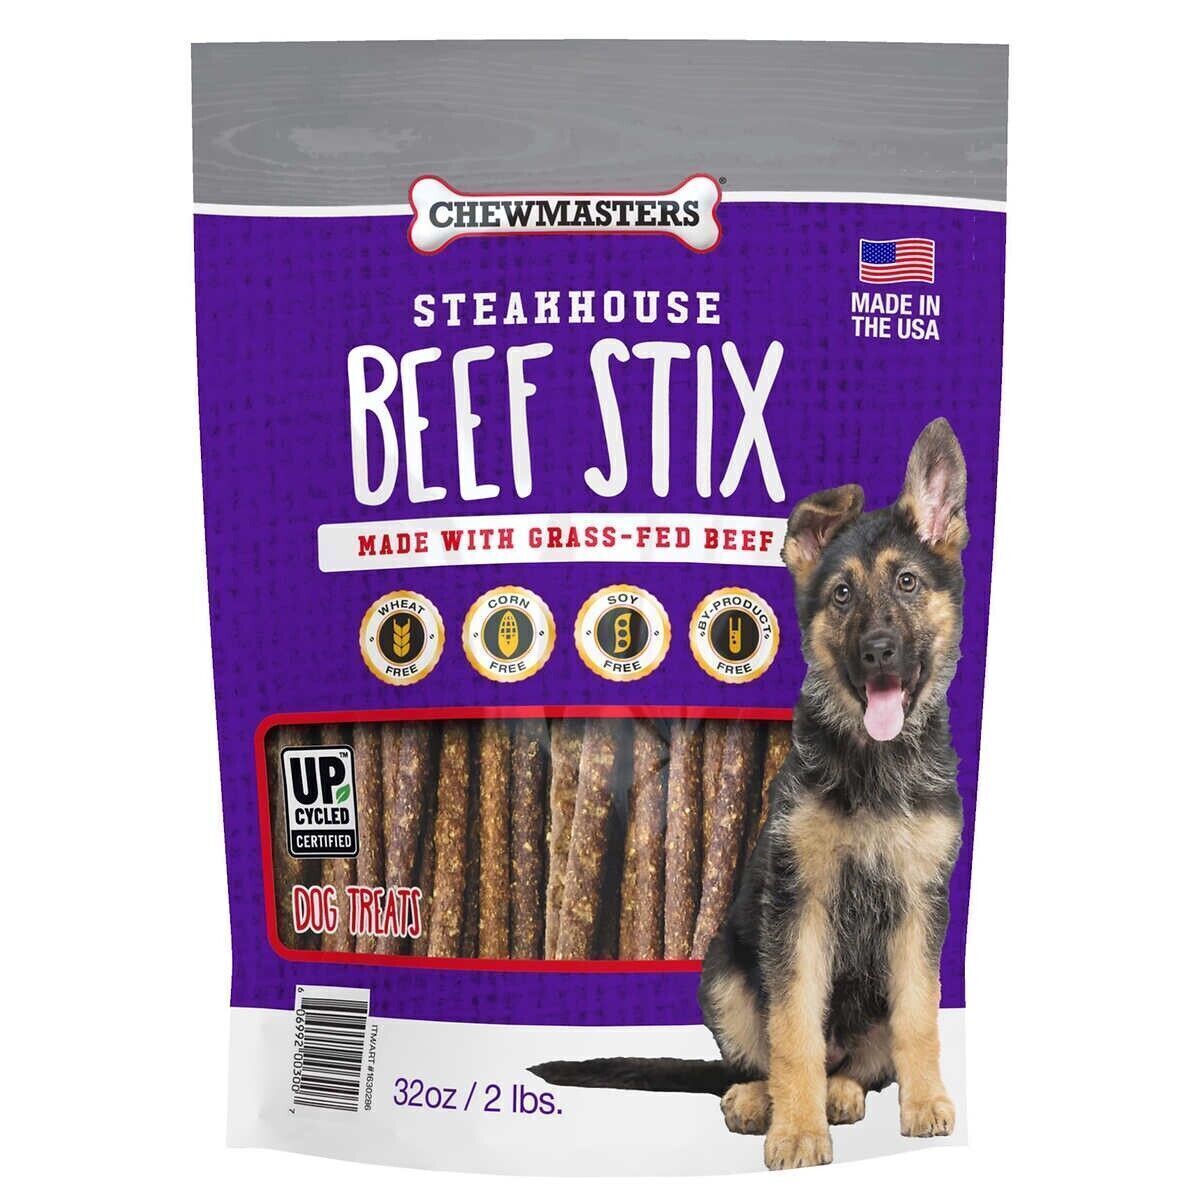 Chewmasters Steakhouse Beef Stix, 32oz, 2-pack Dog Treats Beef...